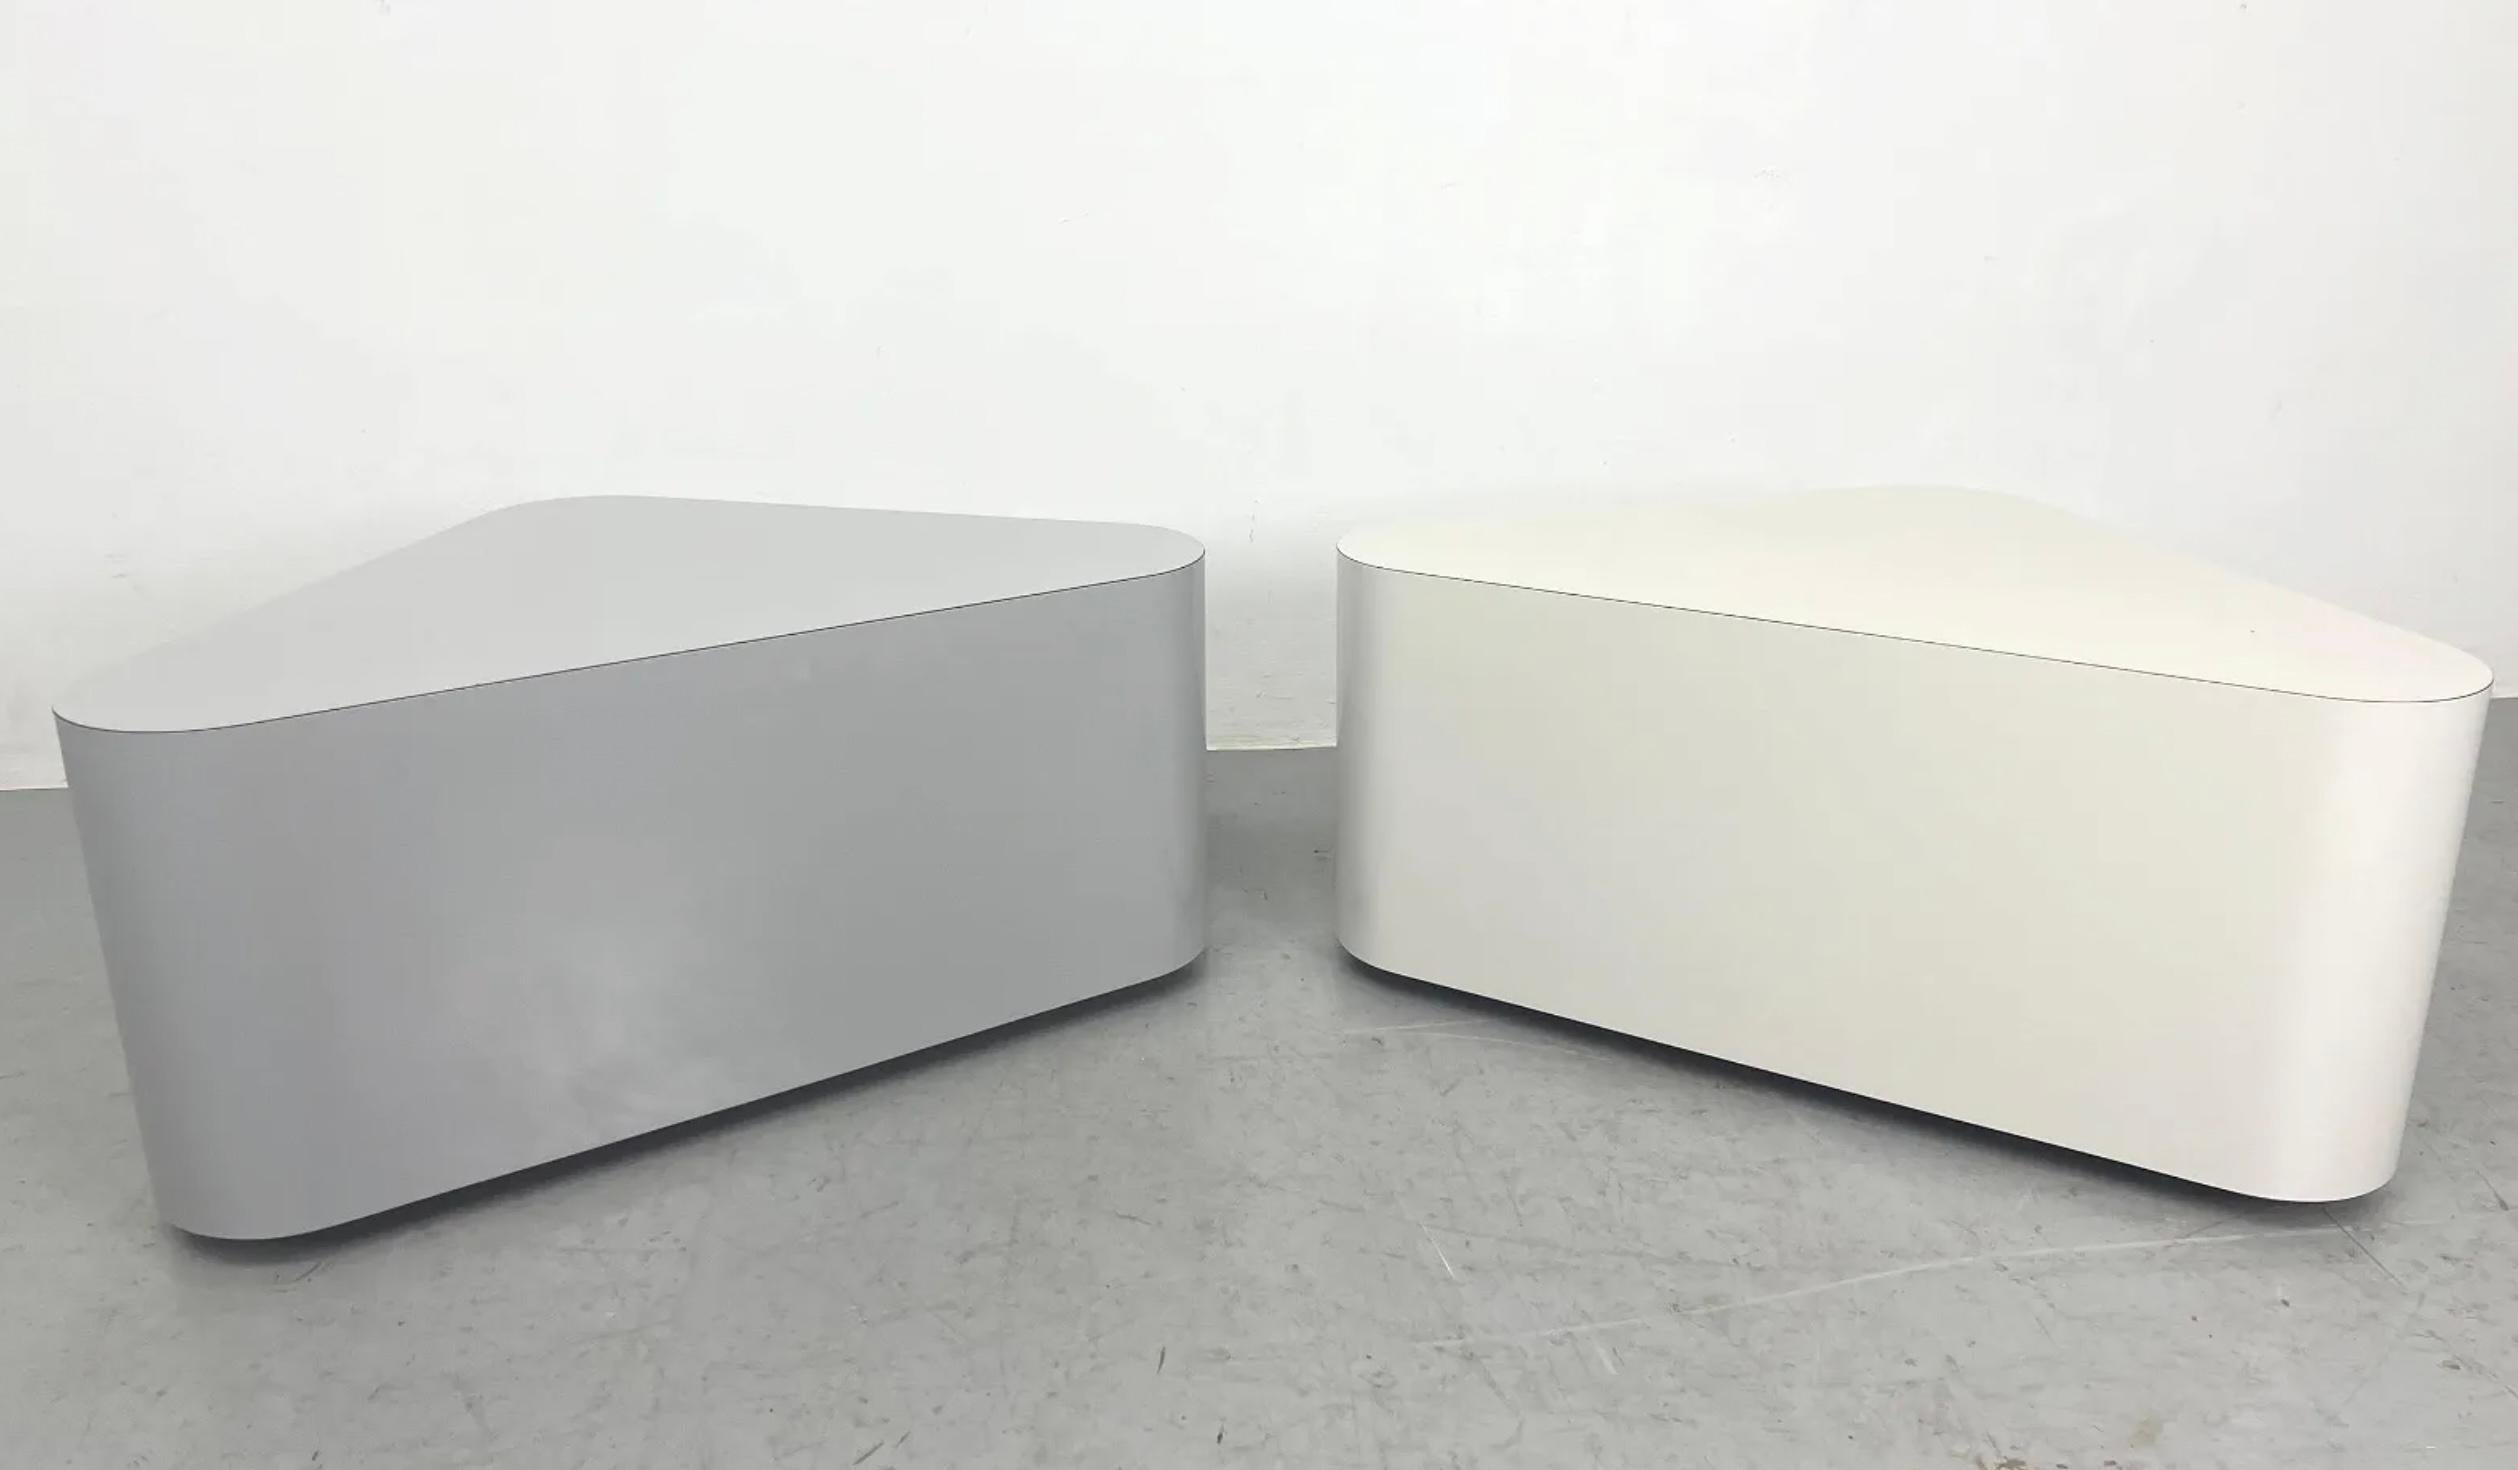 Pair of Post Modern Laminate rounded Triangular Side Tables. One is a darker Gray and others is light gray. Each of these end tables have casters to allow them to roll around. Made in USA Circa 1980. Located in Brooklyn NYC

Sold as a set of